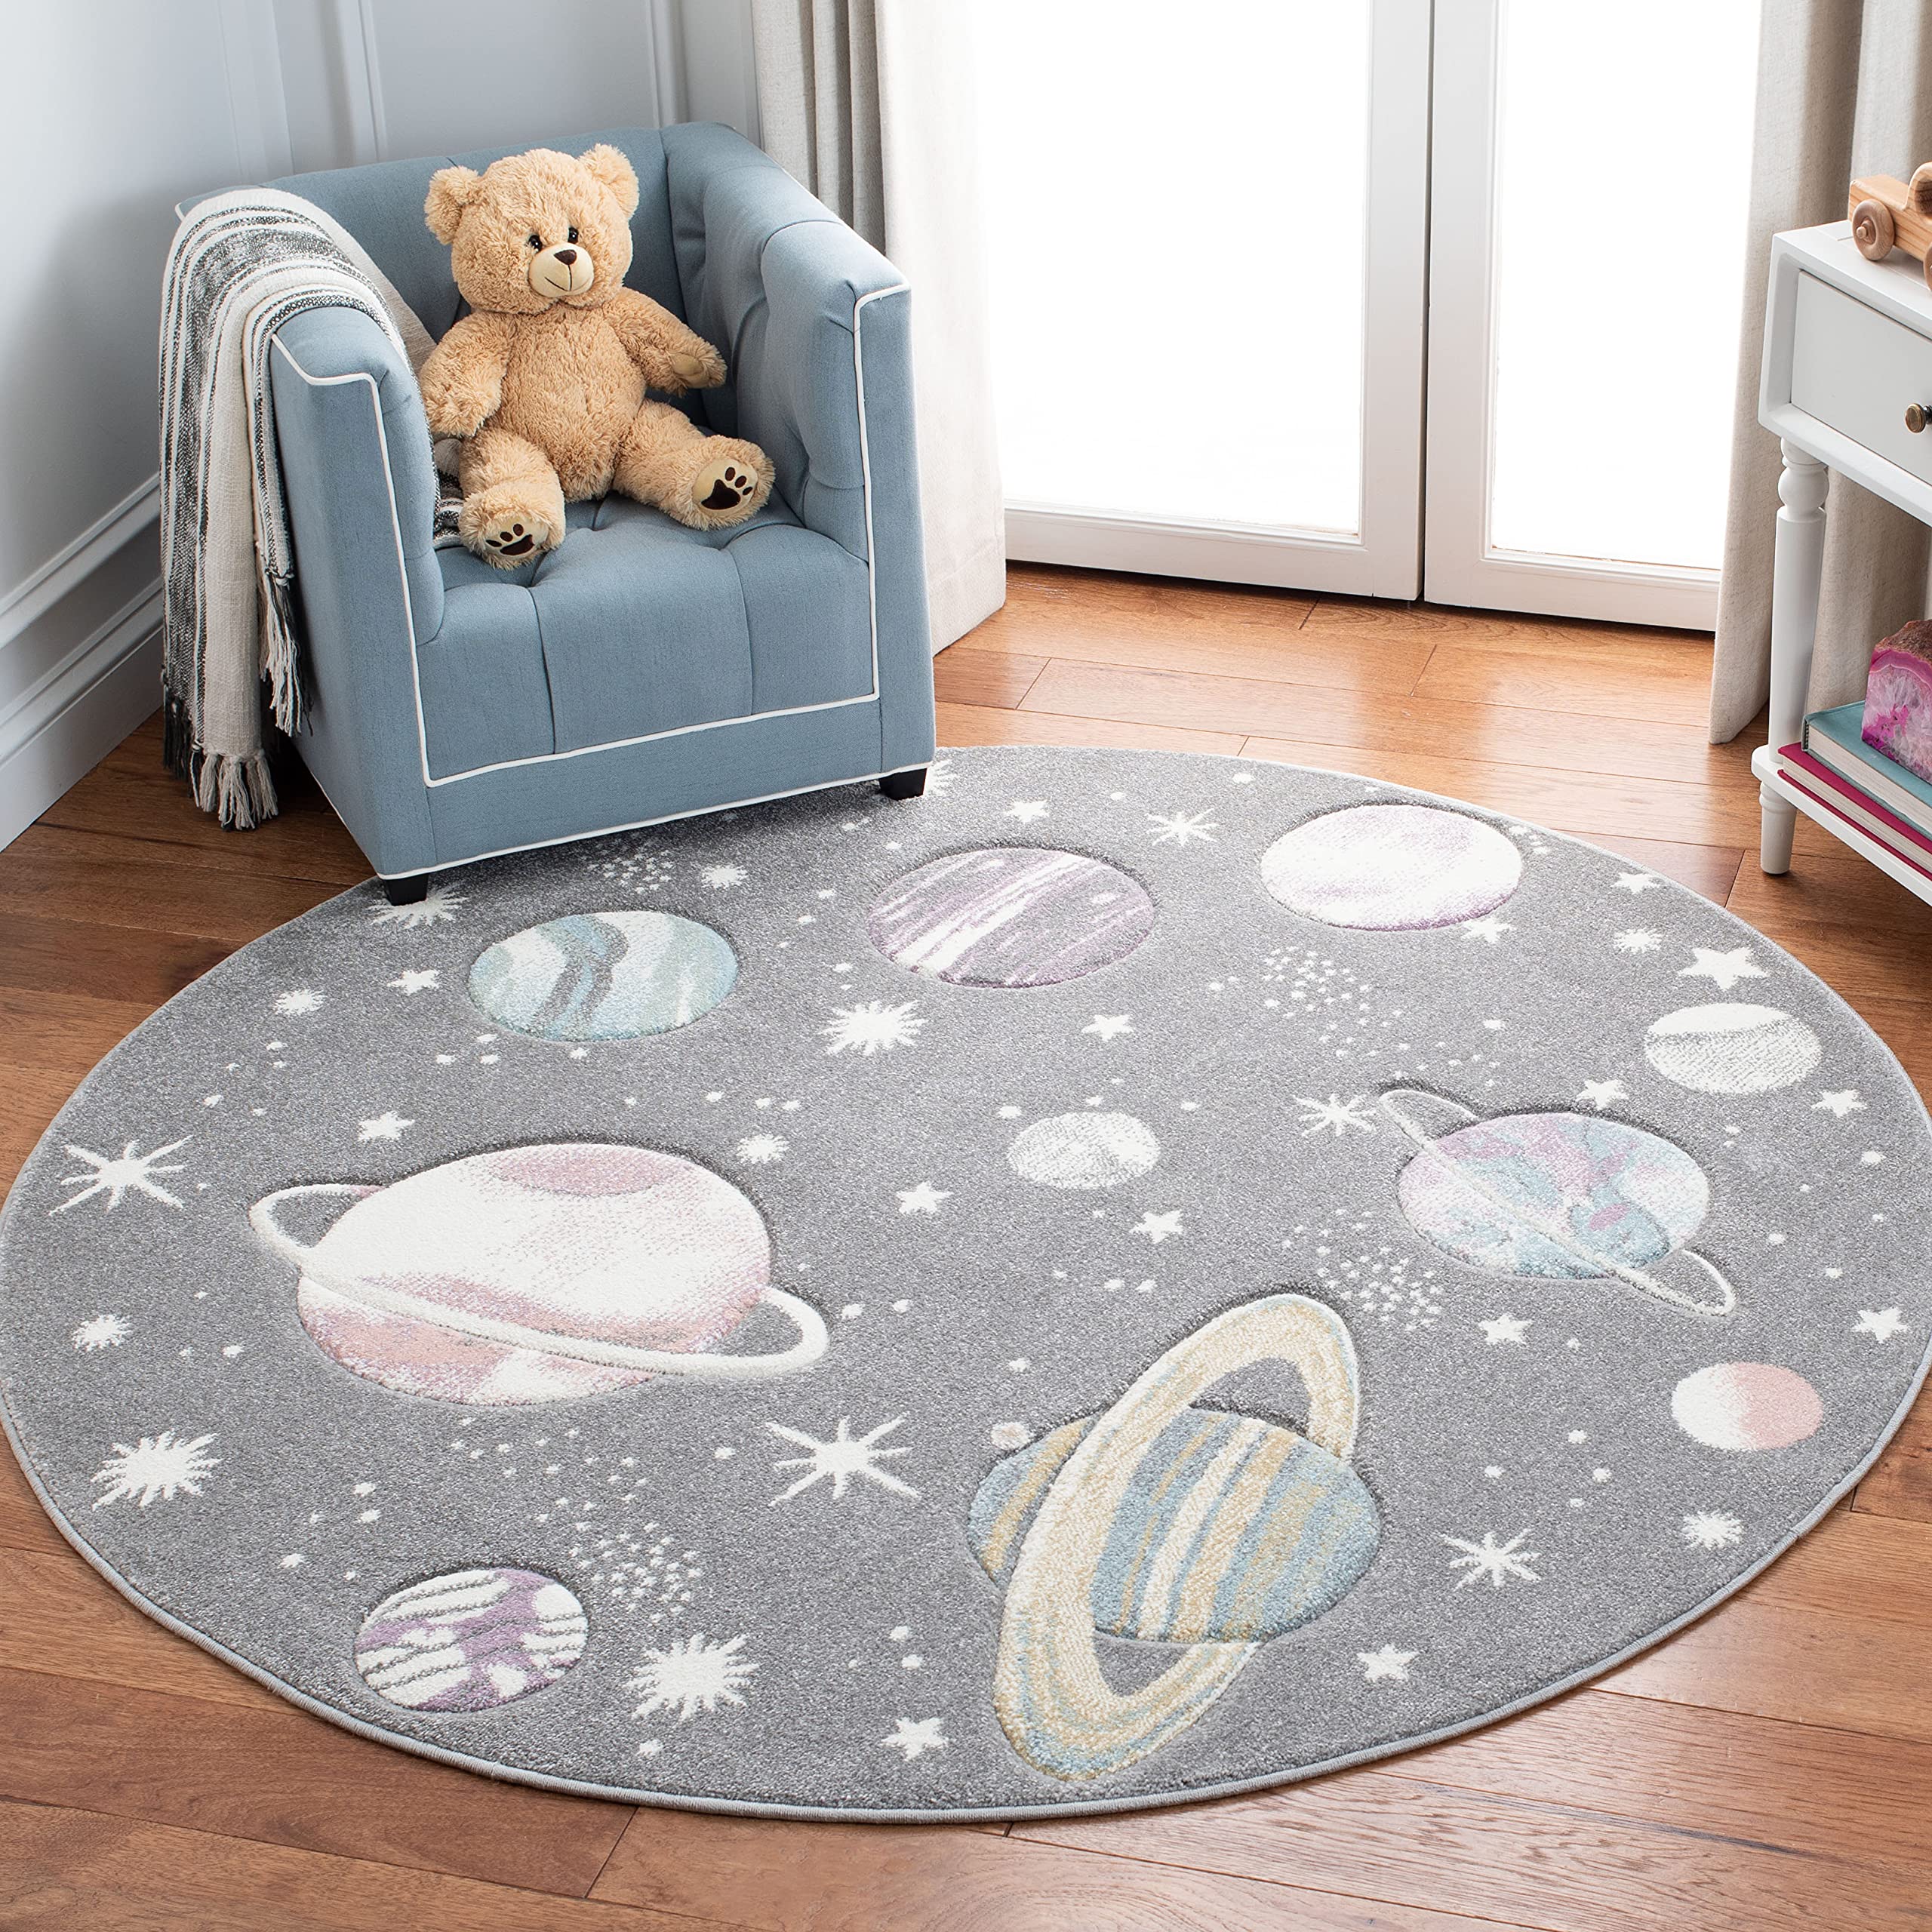 Safavieh carousel Kids collection 8 Round greyLavender cRK103F Outer Space Non-Shedding Playroom Nursery Bedroom Area Rug